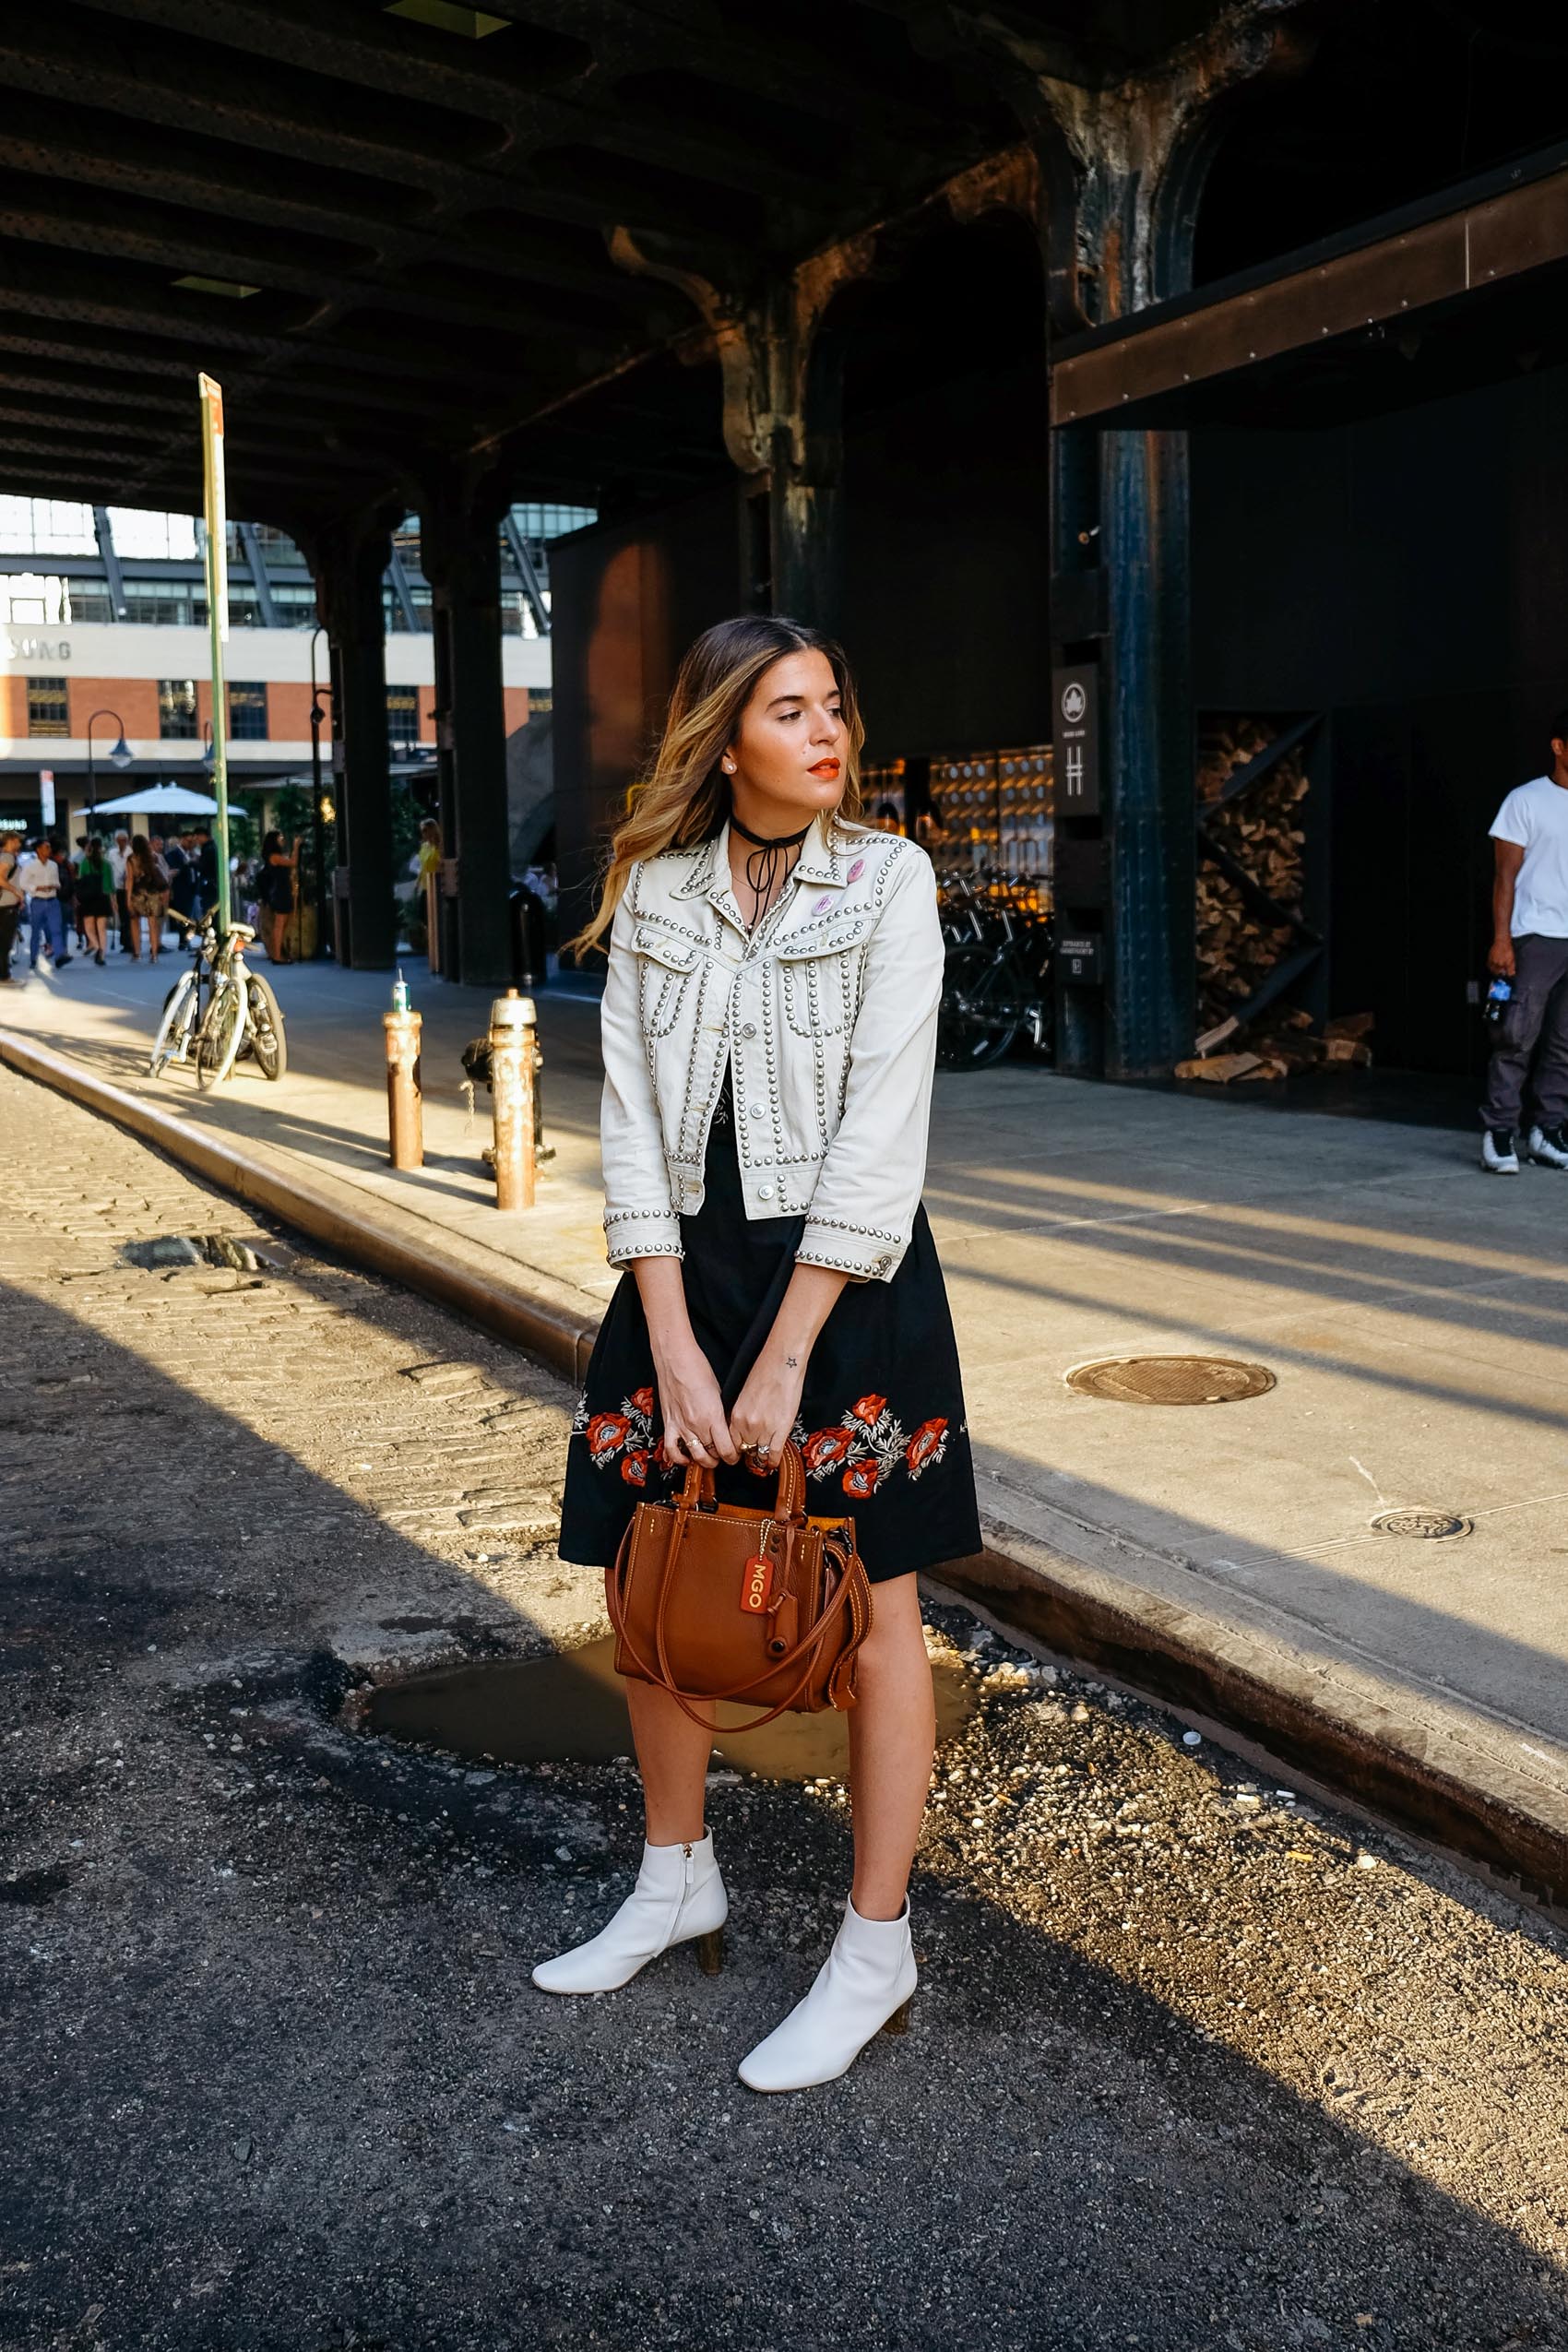 Maristella wears a studded ivory denim jacket from Coach, flower embroidered dress from H&M, white boots from Uterqüe, Coach Rogue bag in glovetan leather